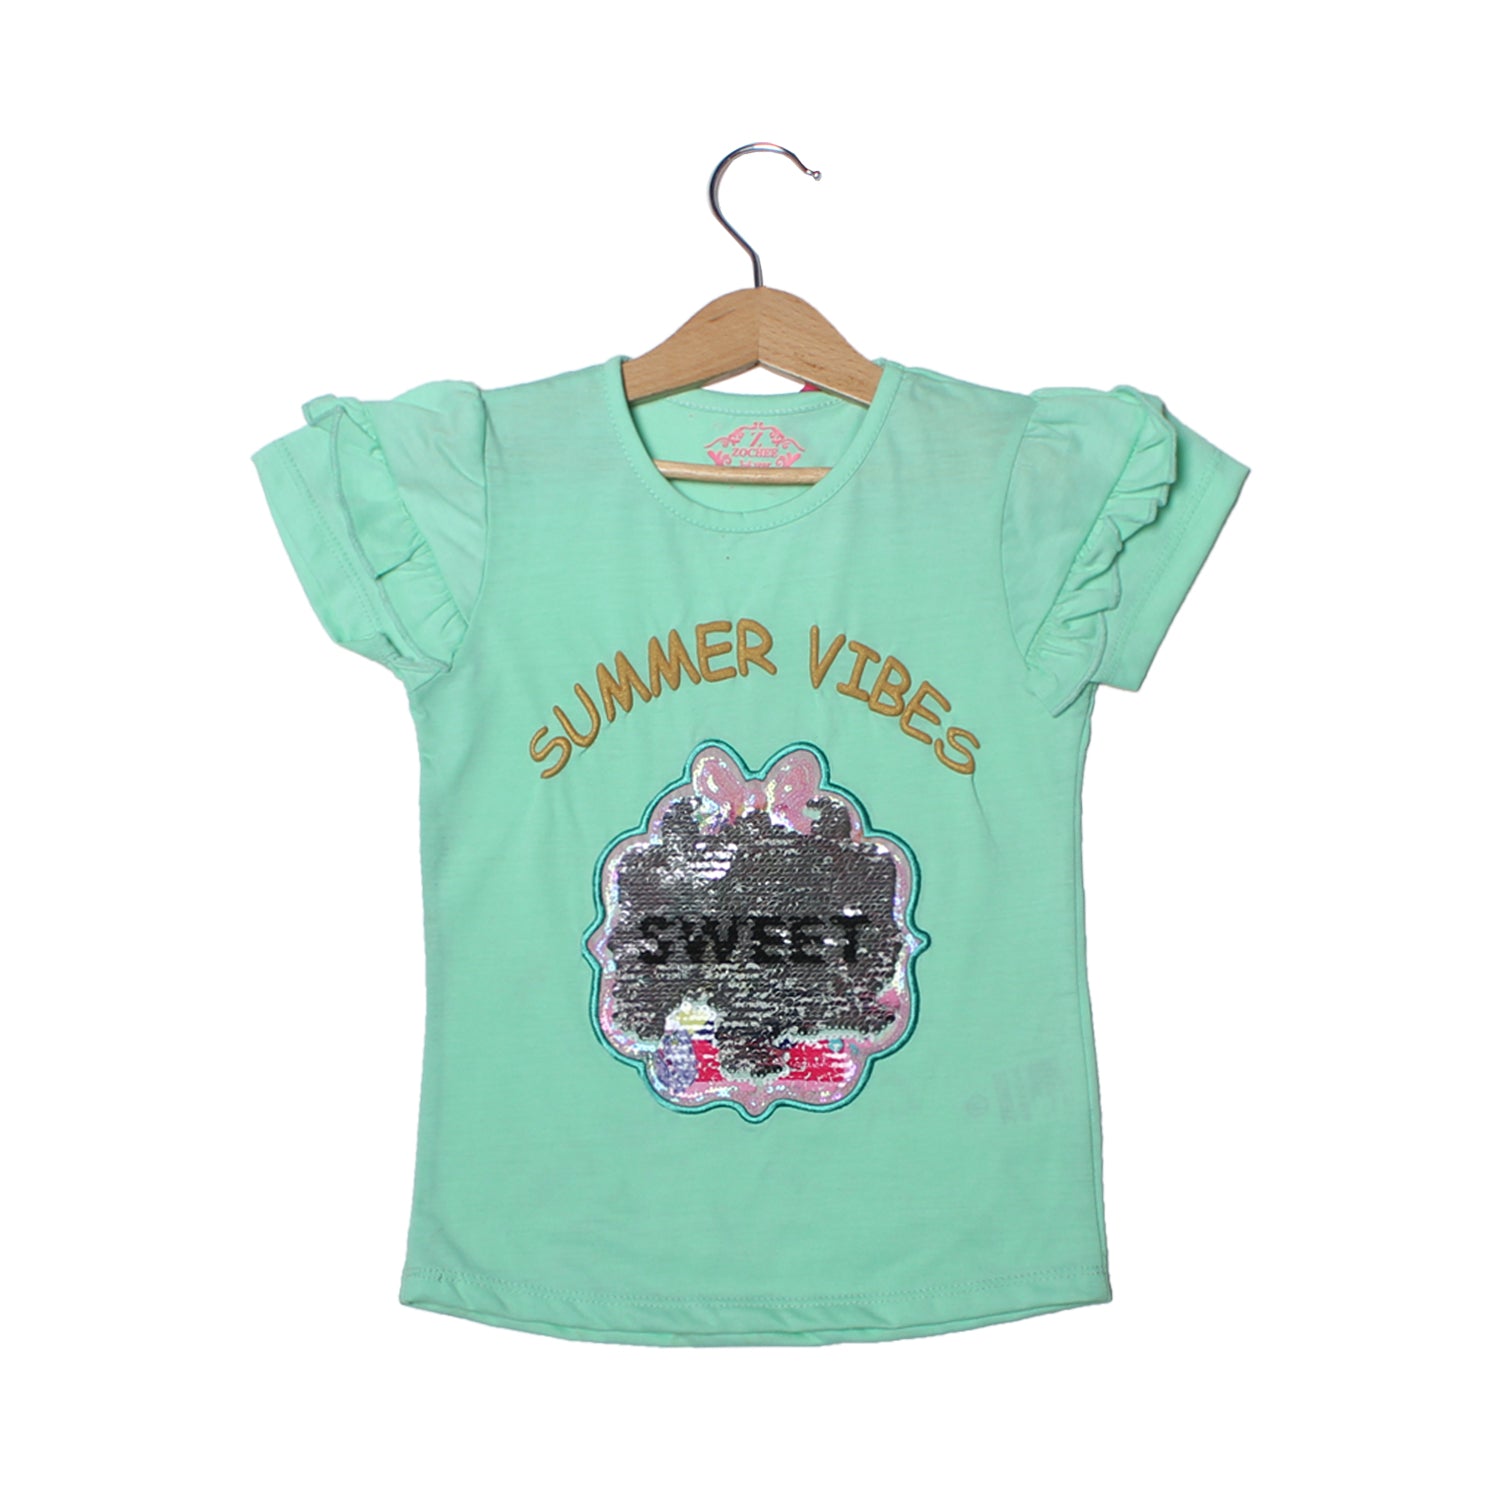 NEW SEA GREEN SUMMER VIBES PATCH PRINTED T-SHIRT TOP FOR GIRLS